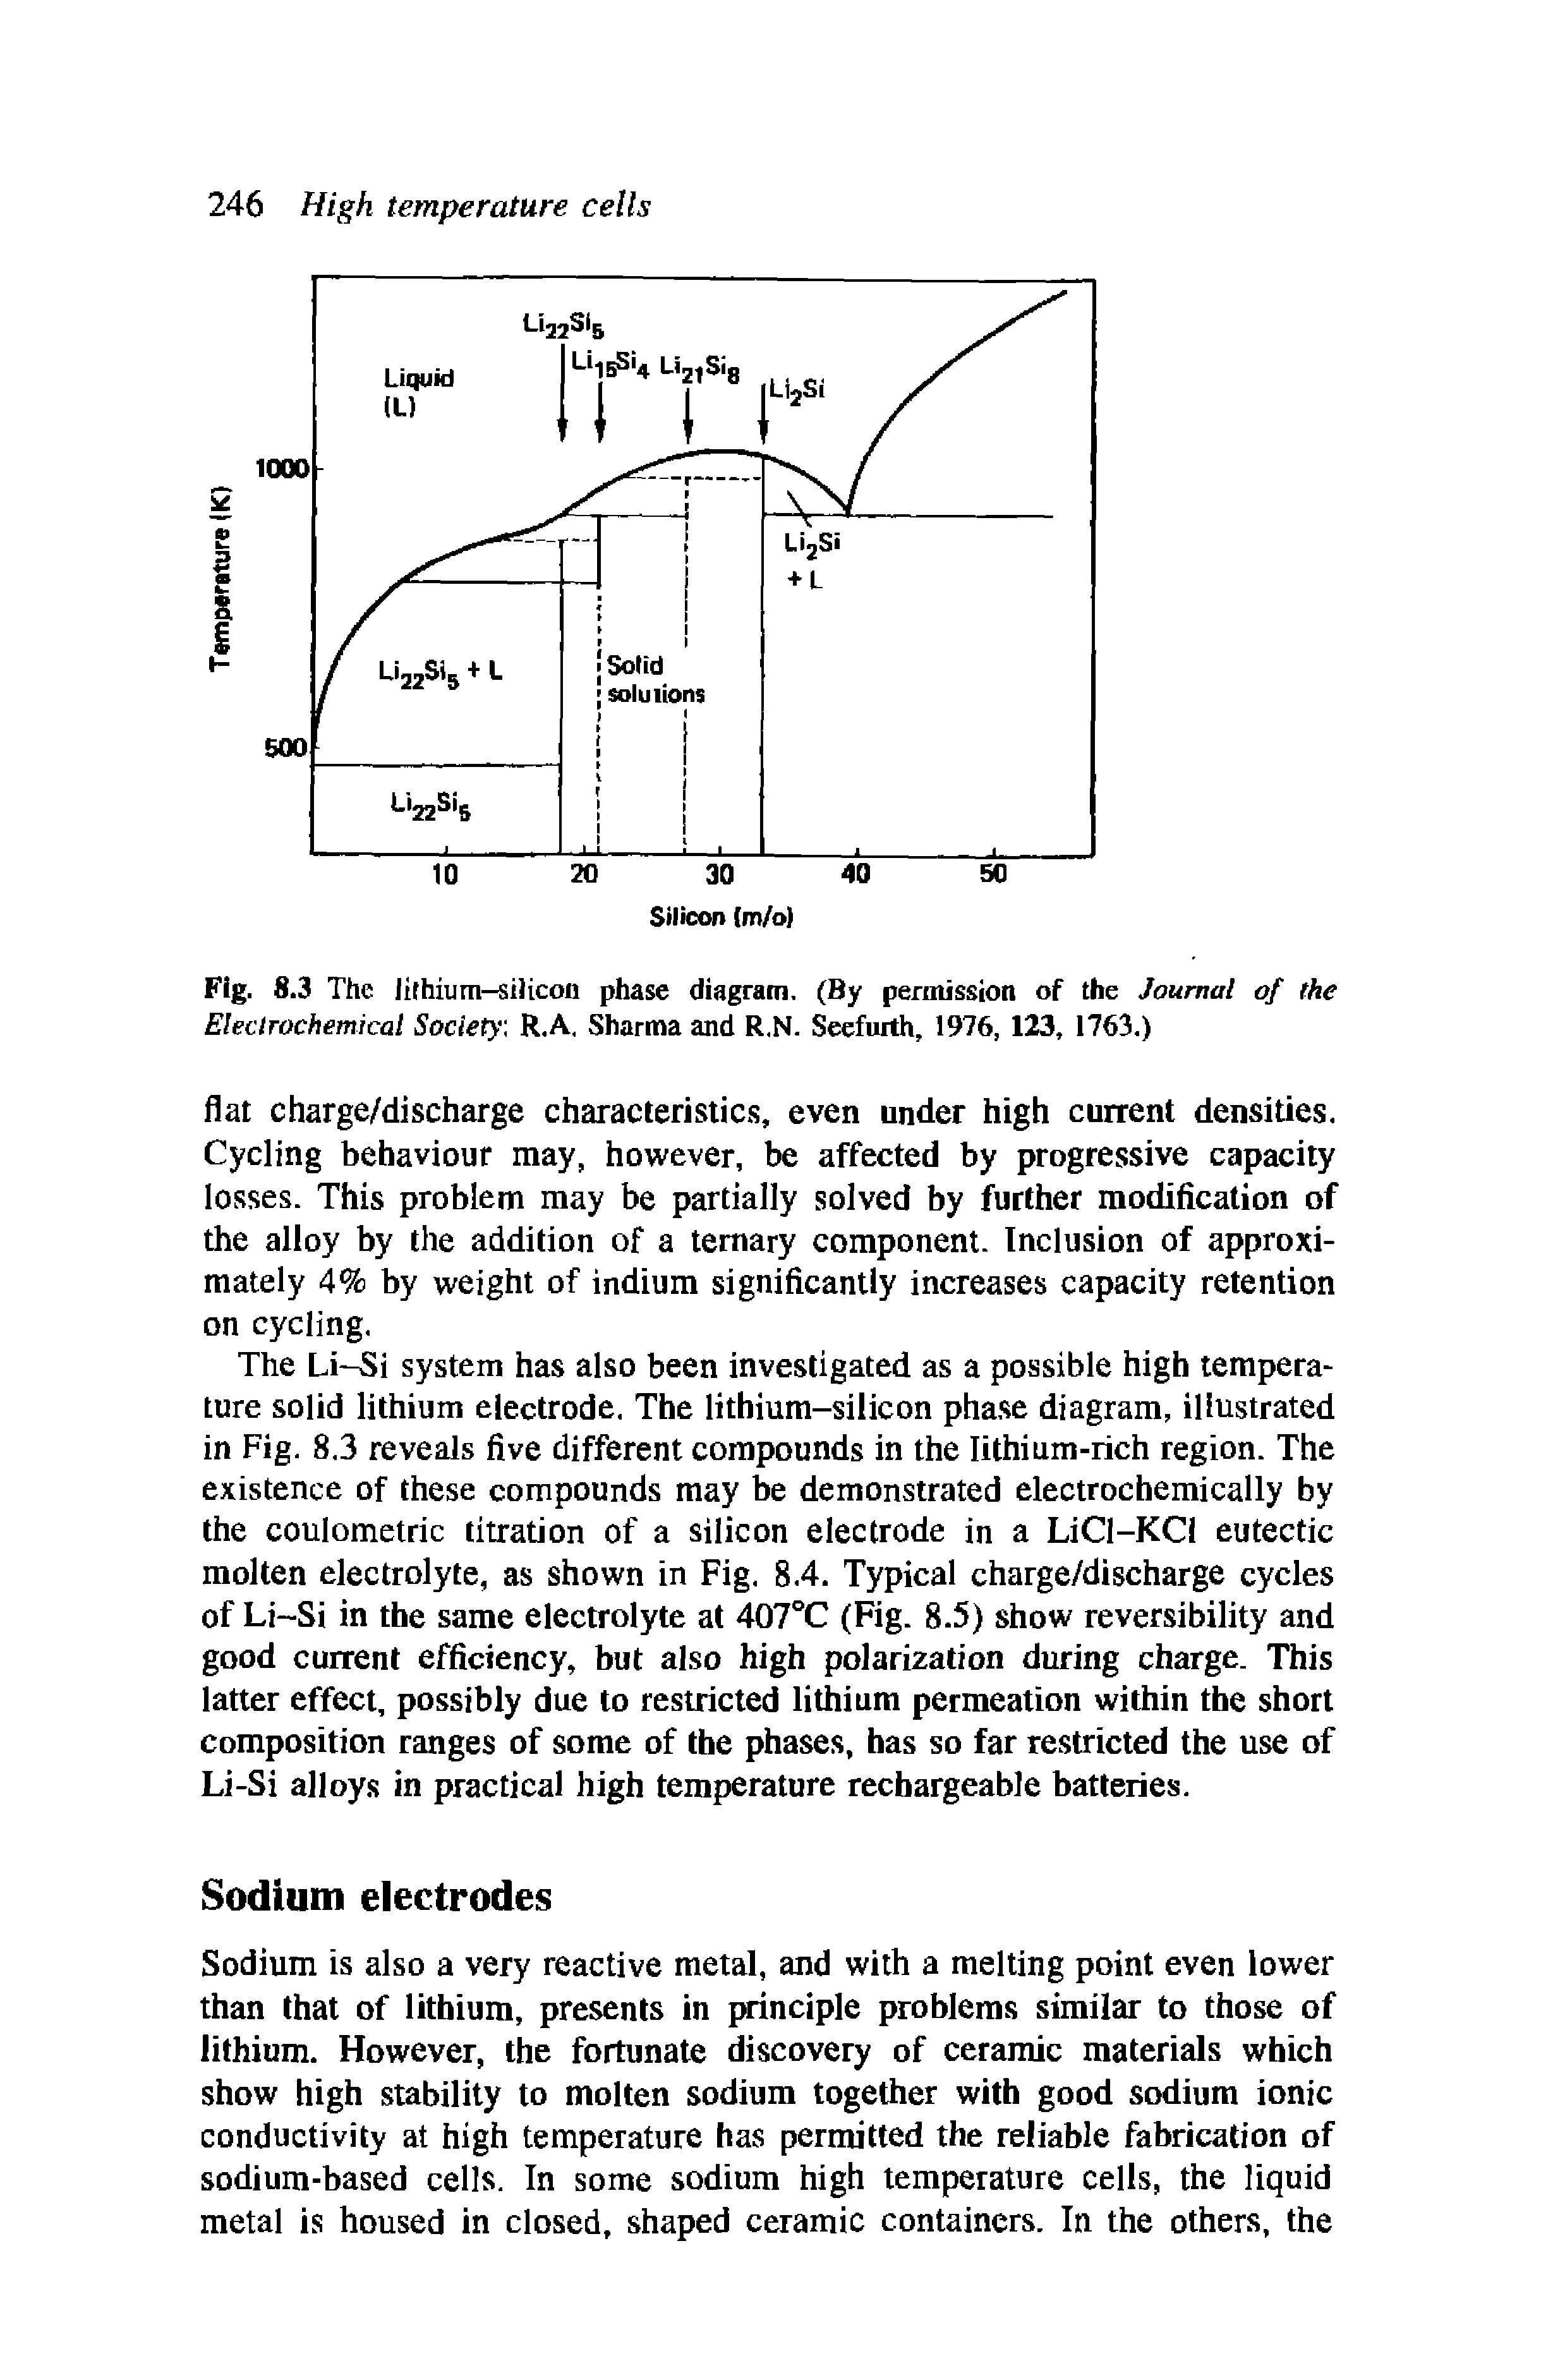 Fig. 8.3 The lithium—silicon phase diagram. (By permission of the Journal of the Electrochemical Society R.A. Sharma and R.N. Seefurth, 1976, 123, 1763.)...